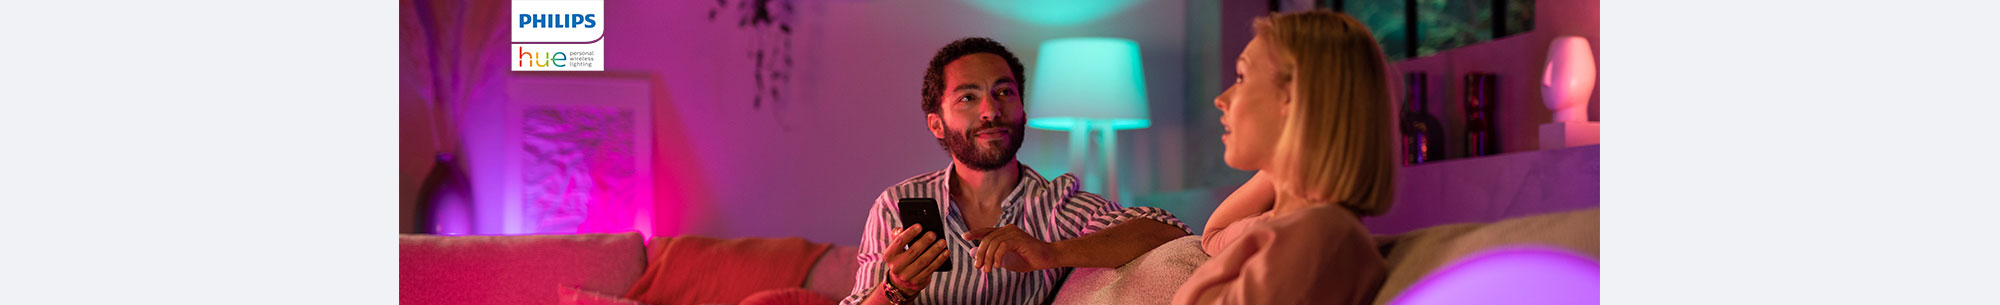 People in a room with shades of green and purple lighting, Philips, Hue personal wireless lighting